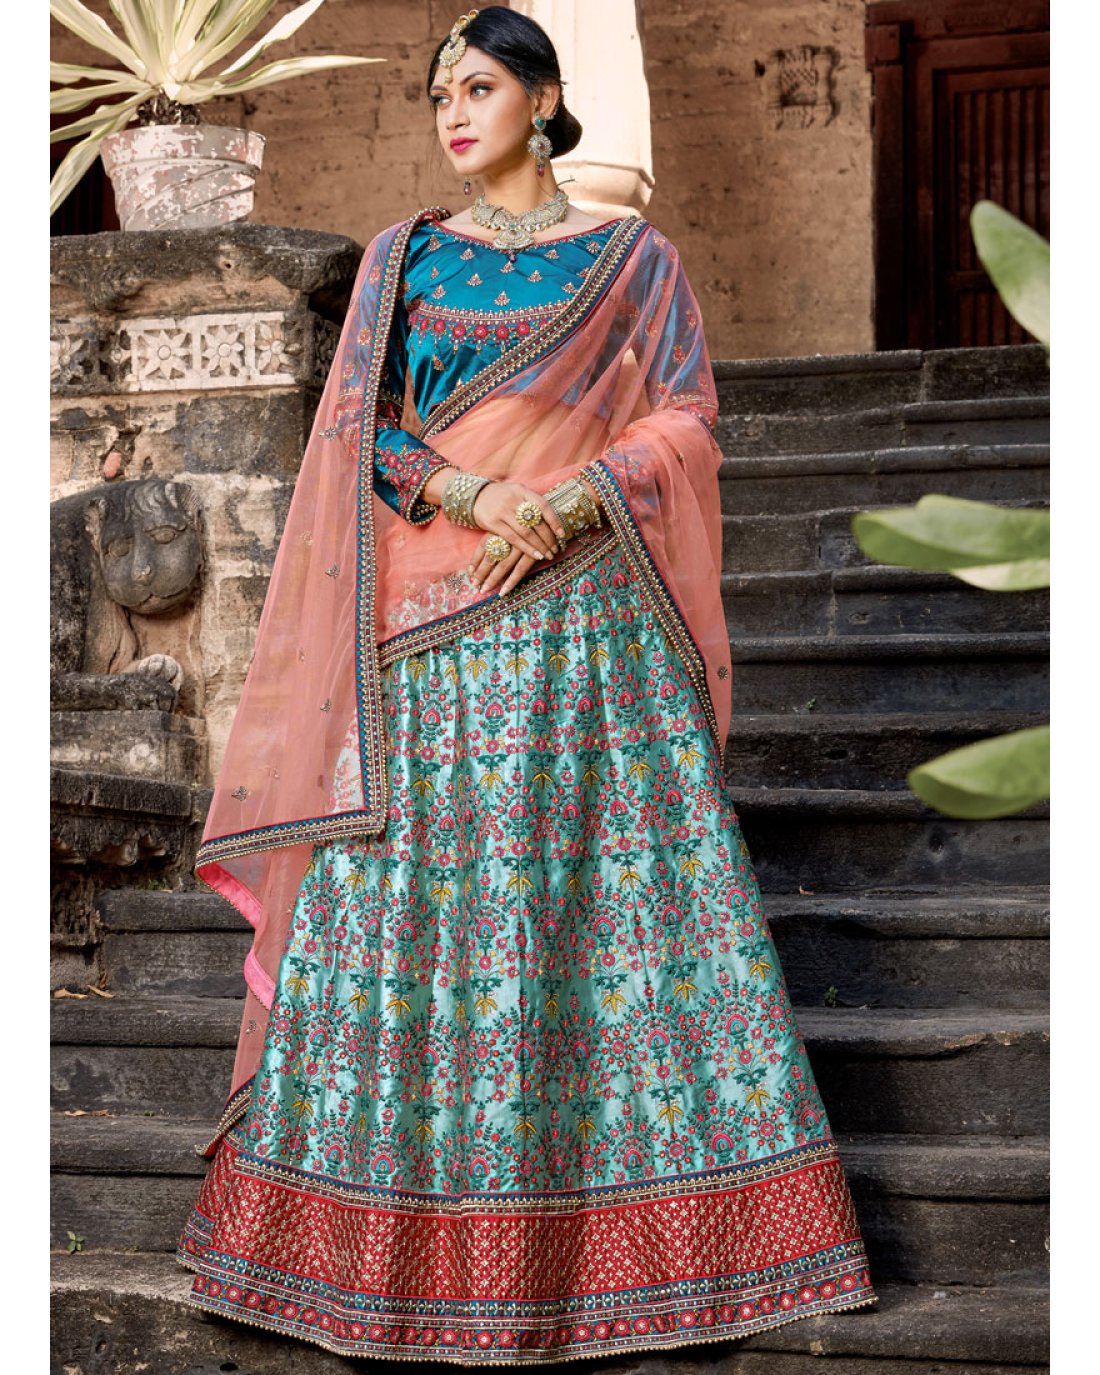 Blue Lehenga Choli in Satin with Embroidered